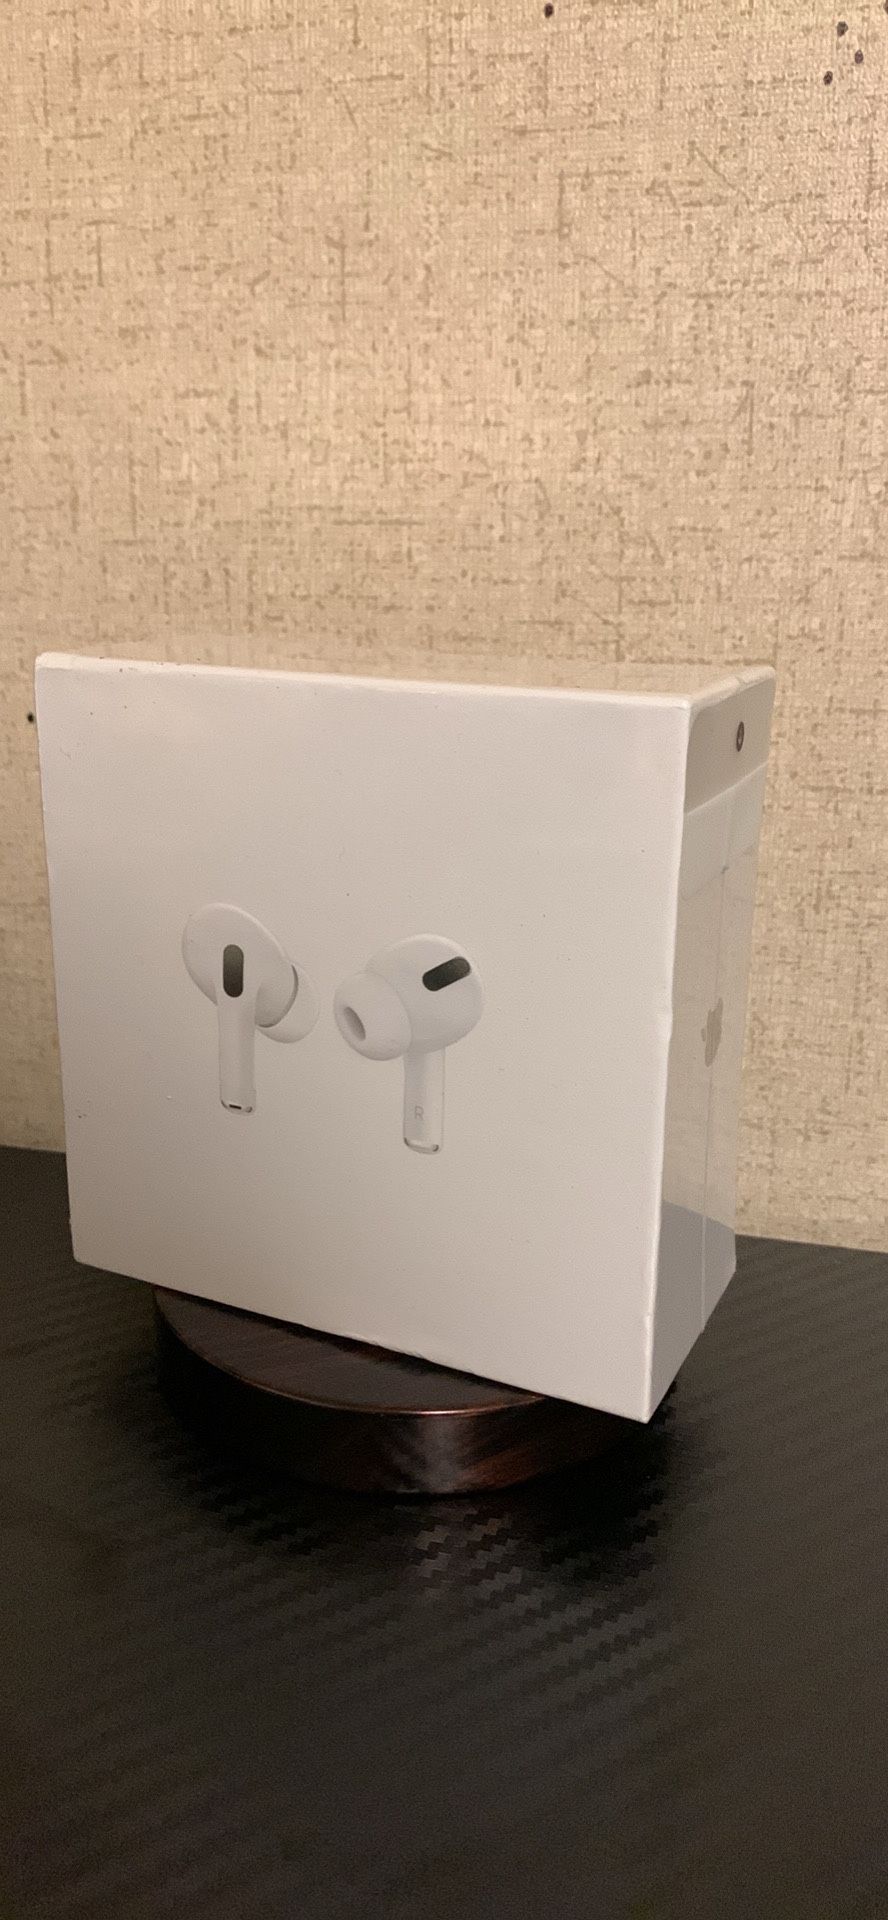 Airpod Pros 2nd Generation with MagSafe charging Case